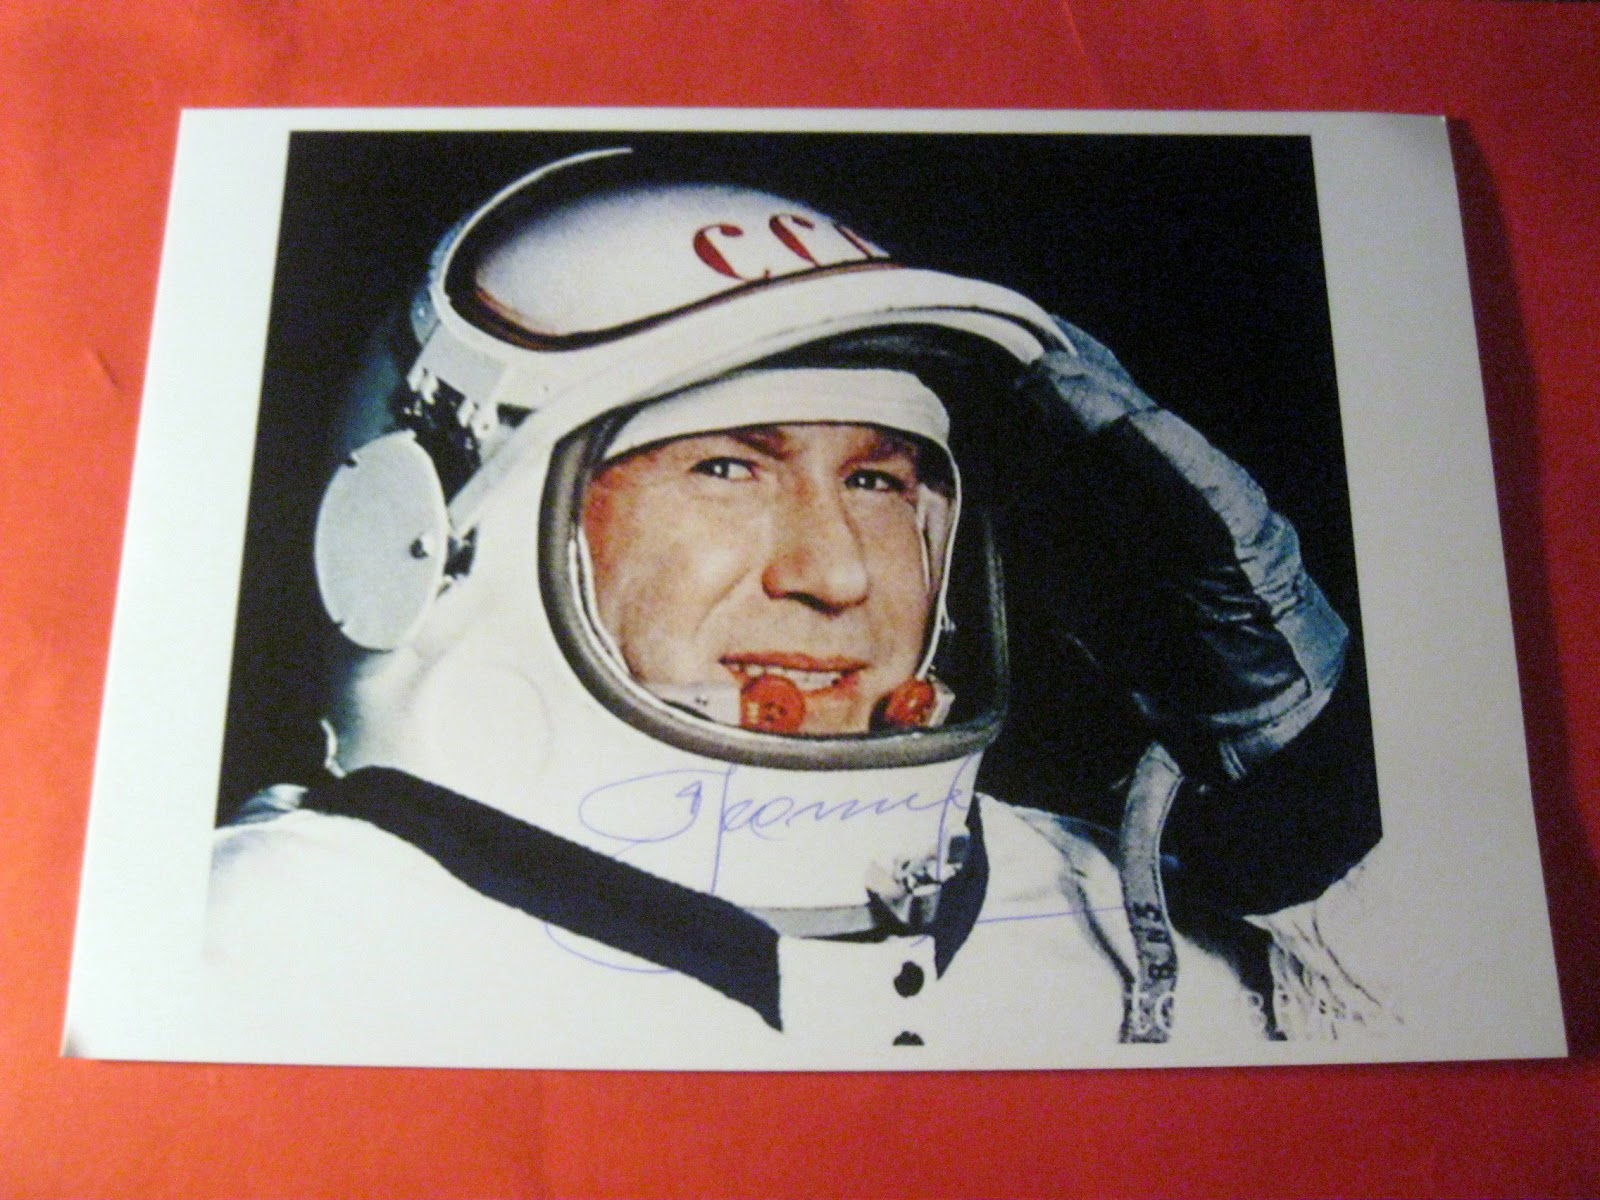 Autograph Vip Success 12 Alexey Leonov Soviet Russian Cosmonaut Who On 18 March 1965 Became The First Human To Conduct A Space Walk